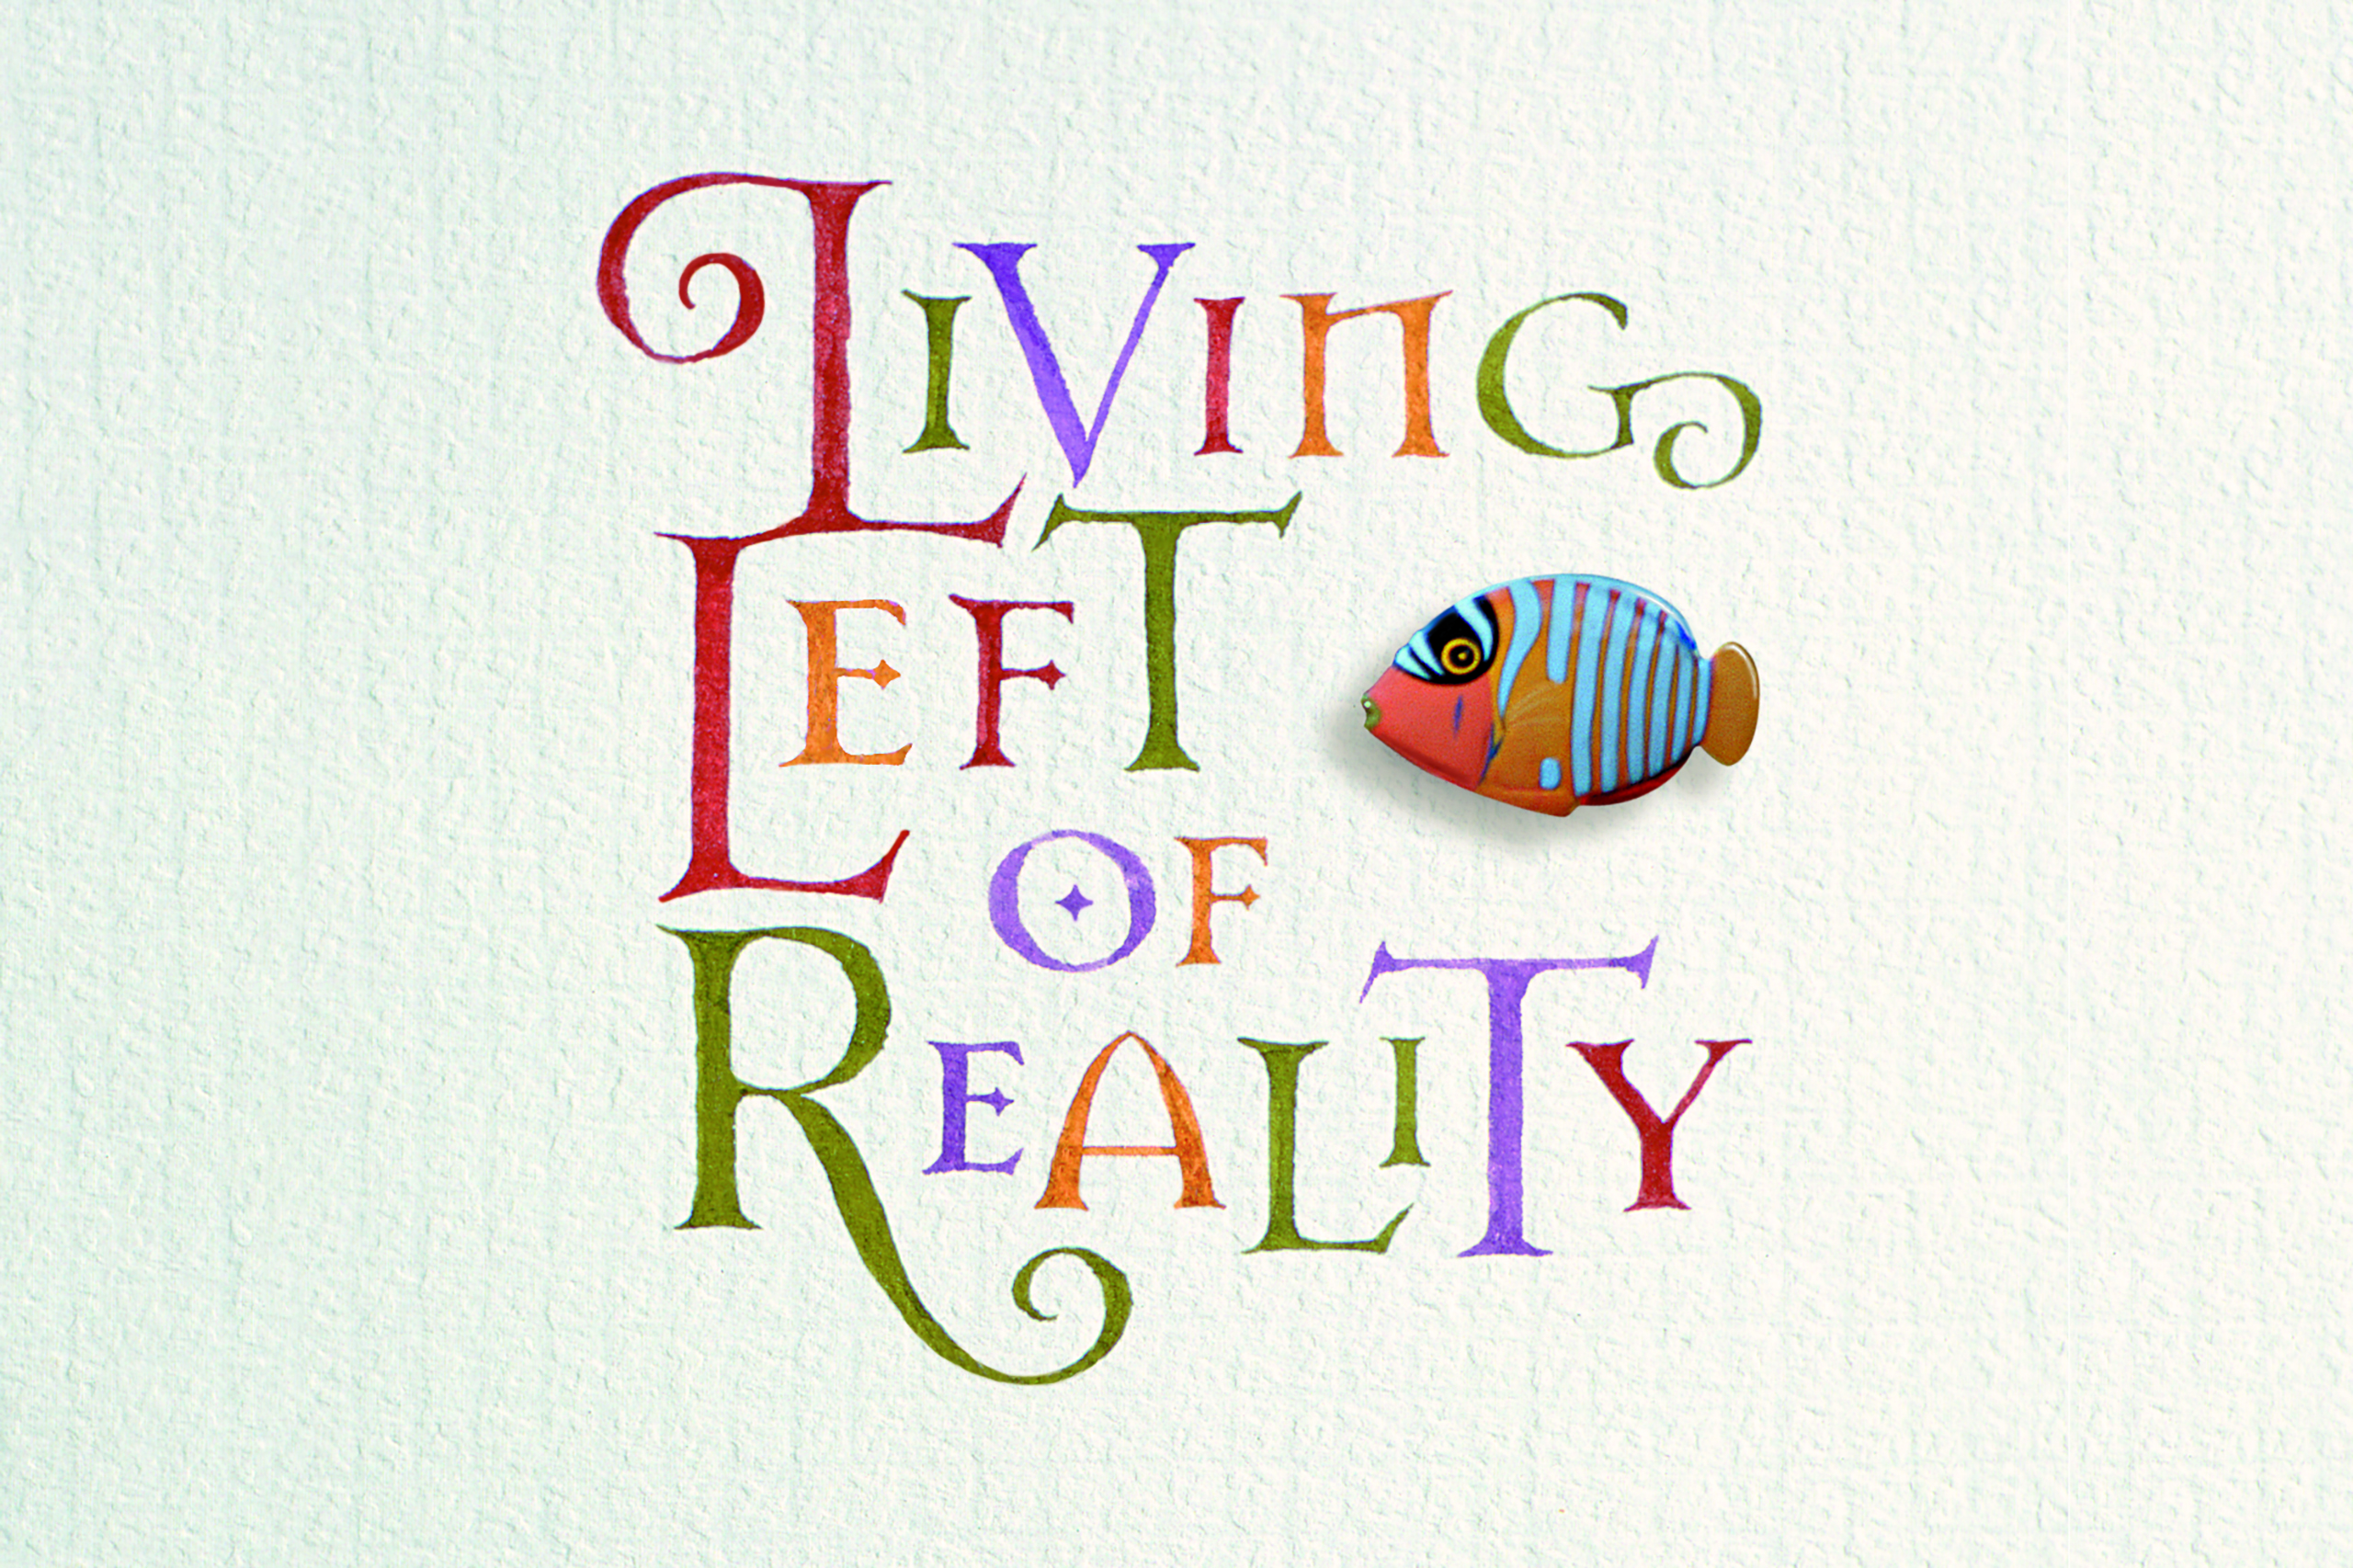 Typographic treatment of the story title "Living Left of Reality"